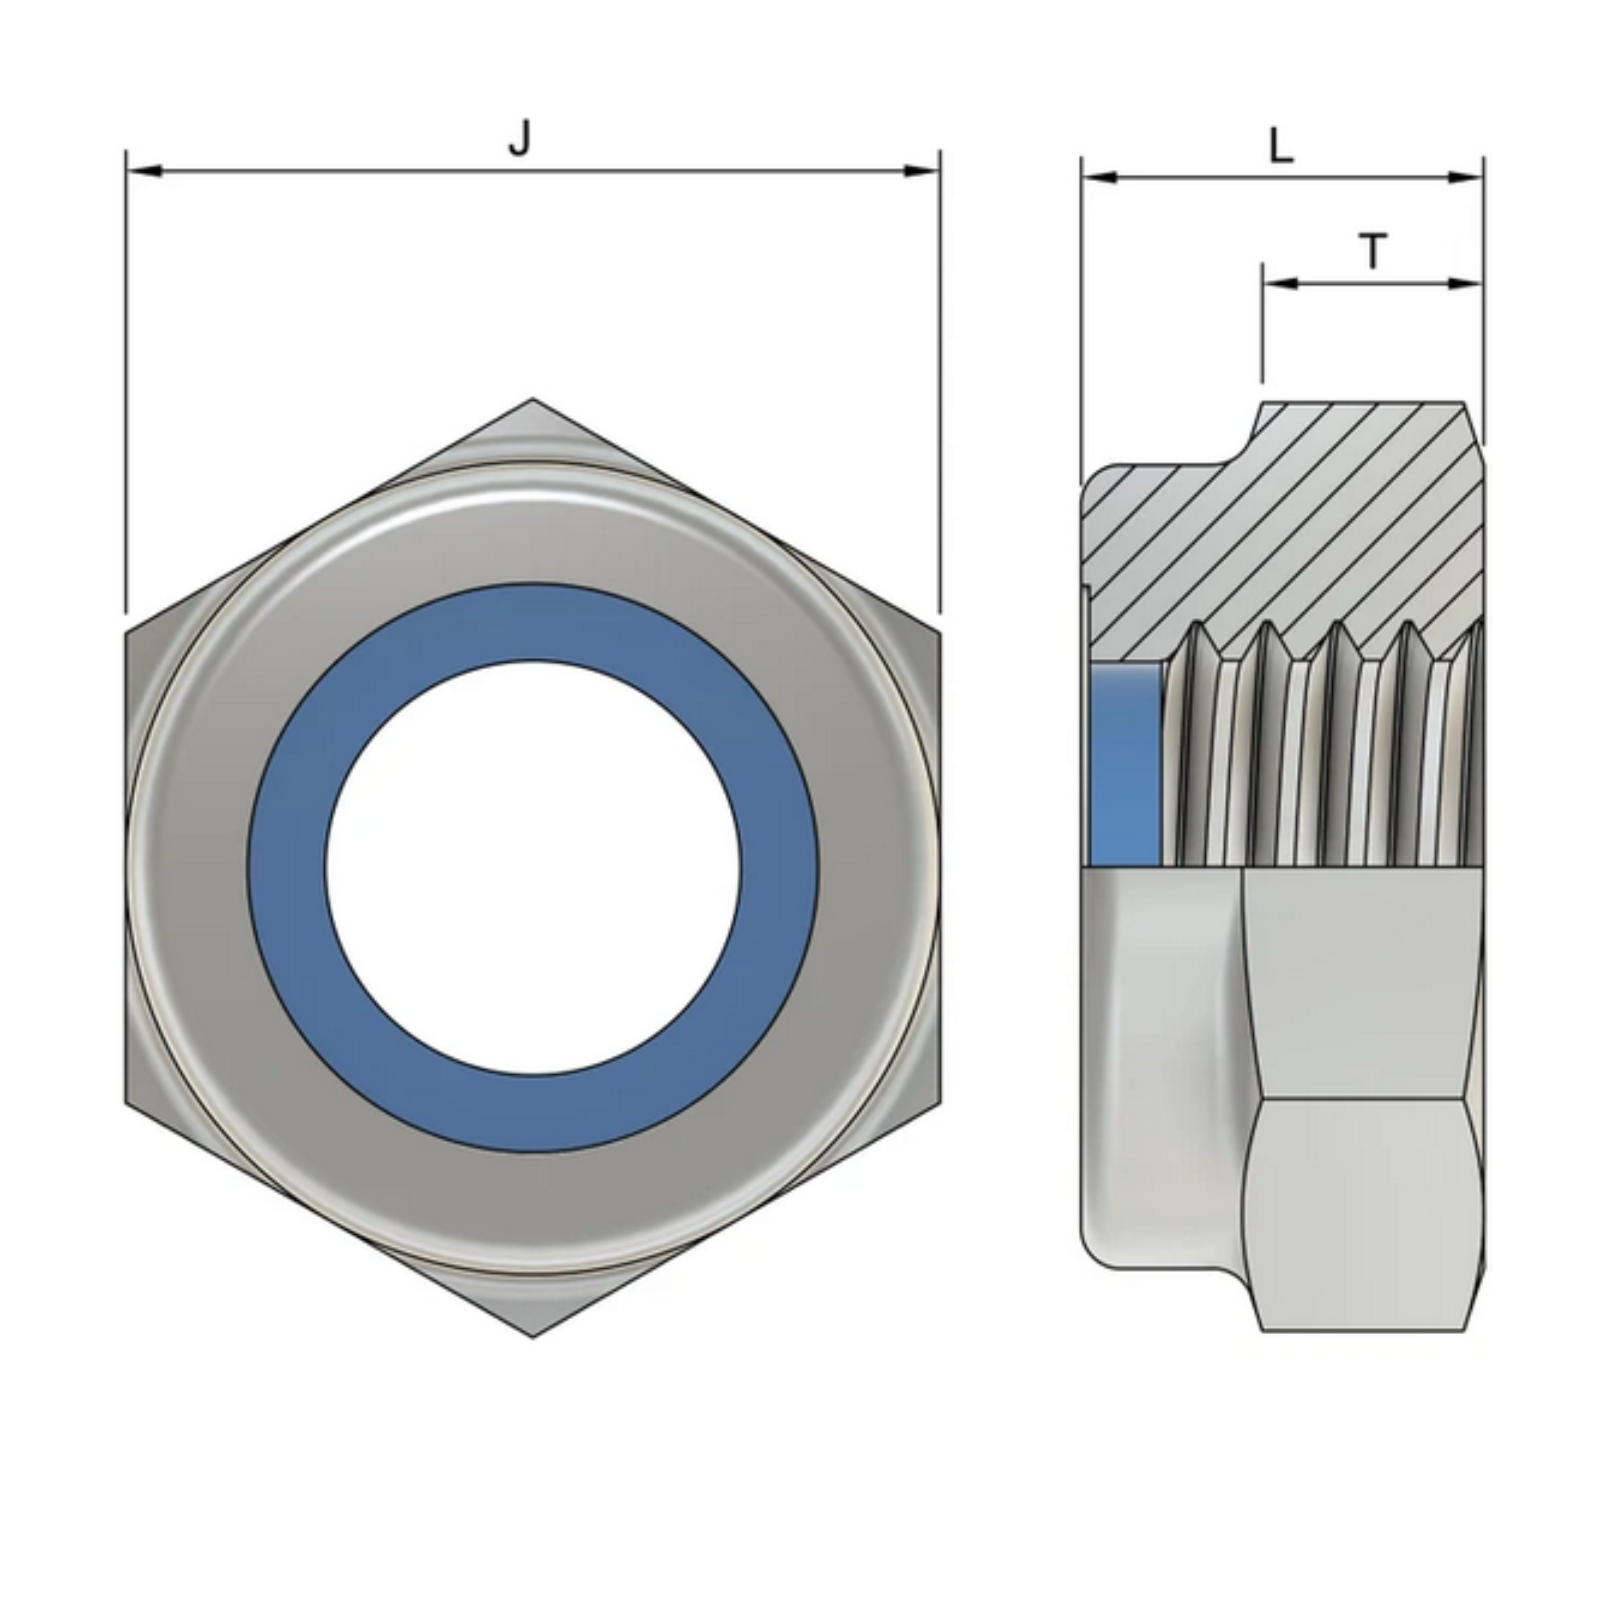 M12 Hexagon Nylon Locking Nuts (DIN 985) - Stainless Steel (A4)